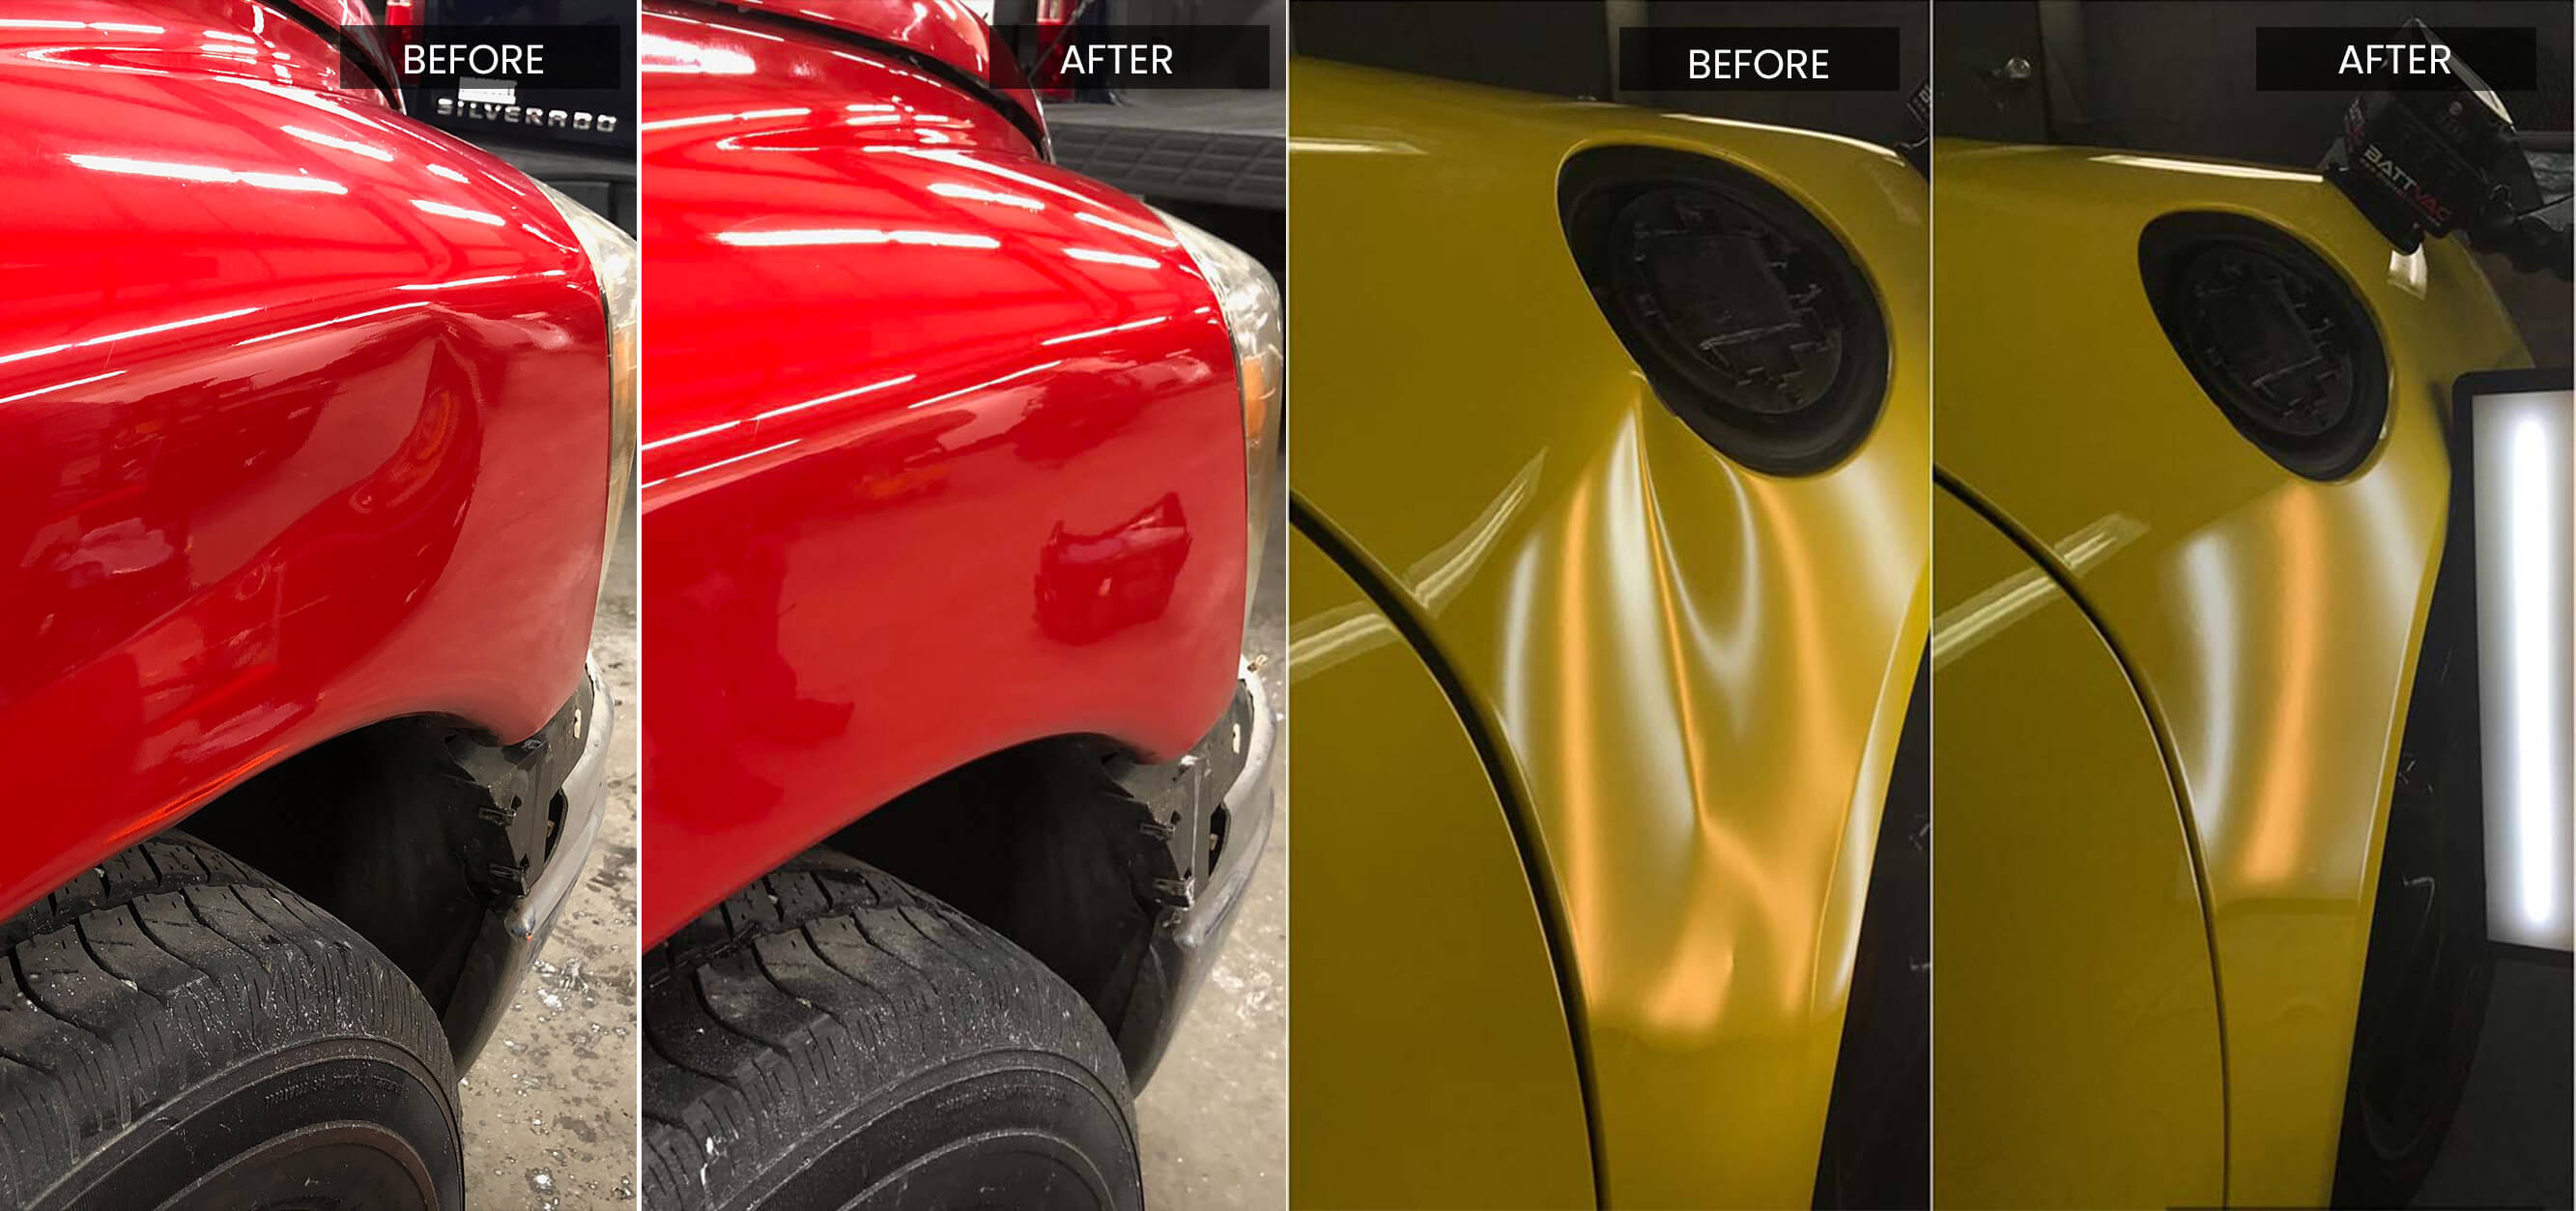 Before and after dent repair